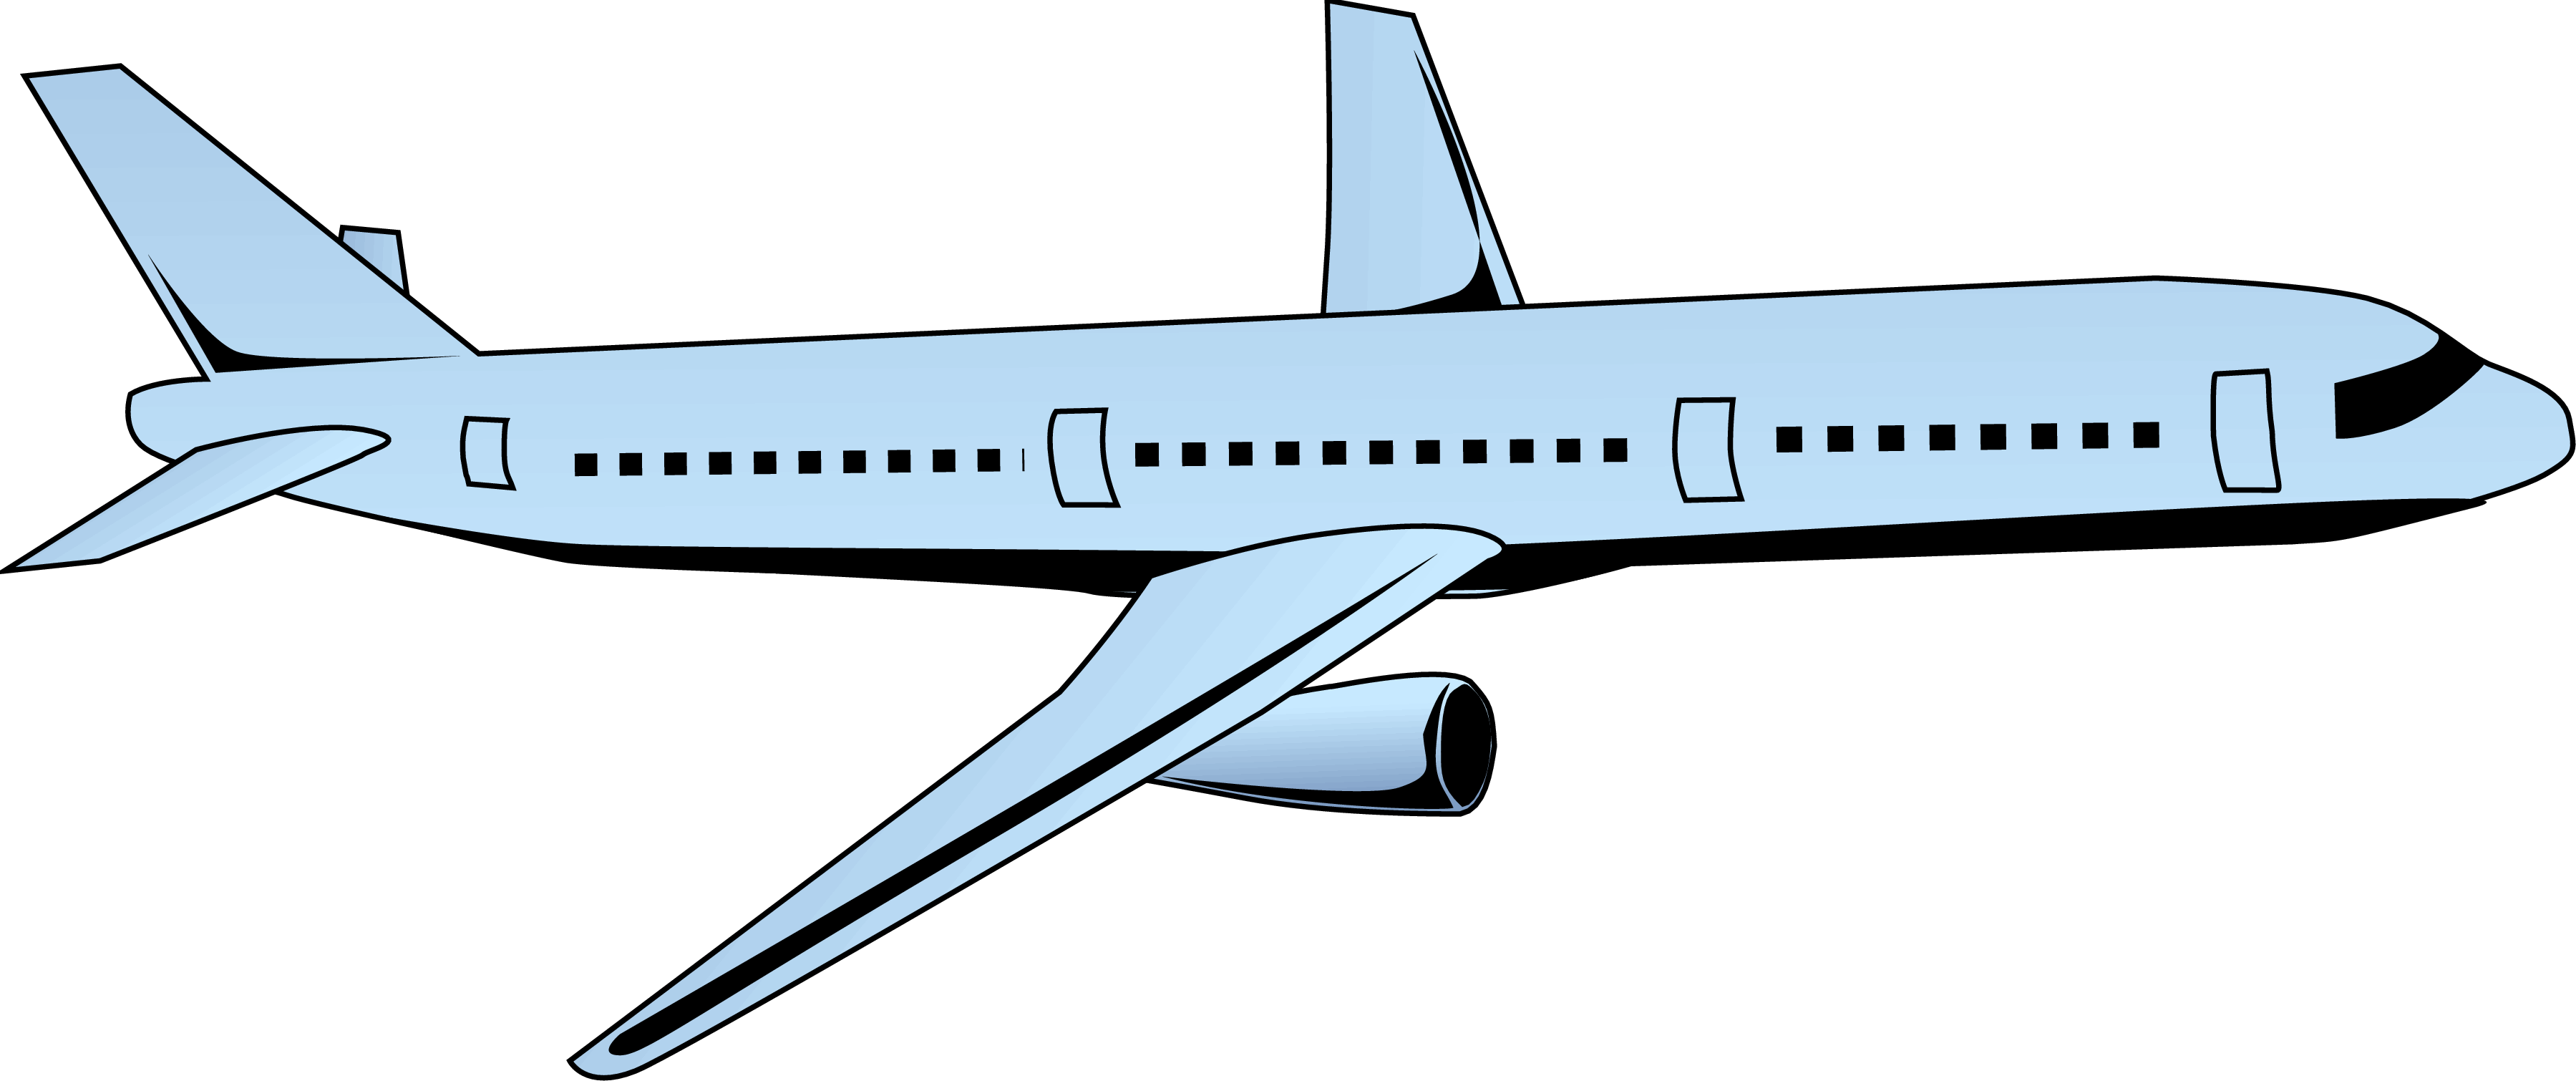 Airplane Cartoon PNG Background Image